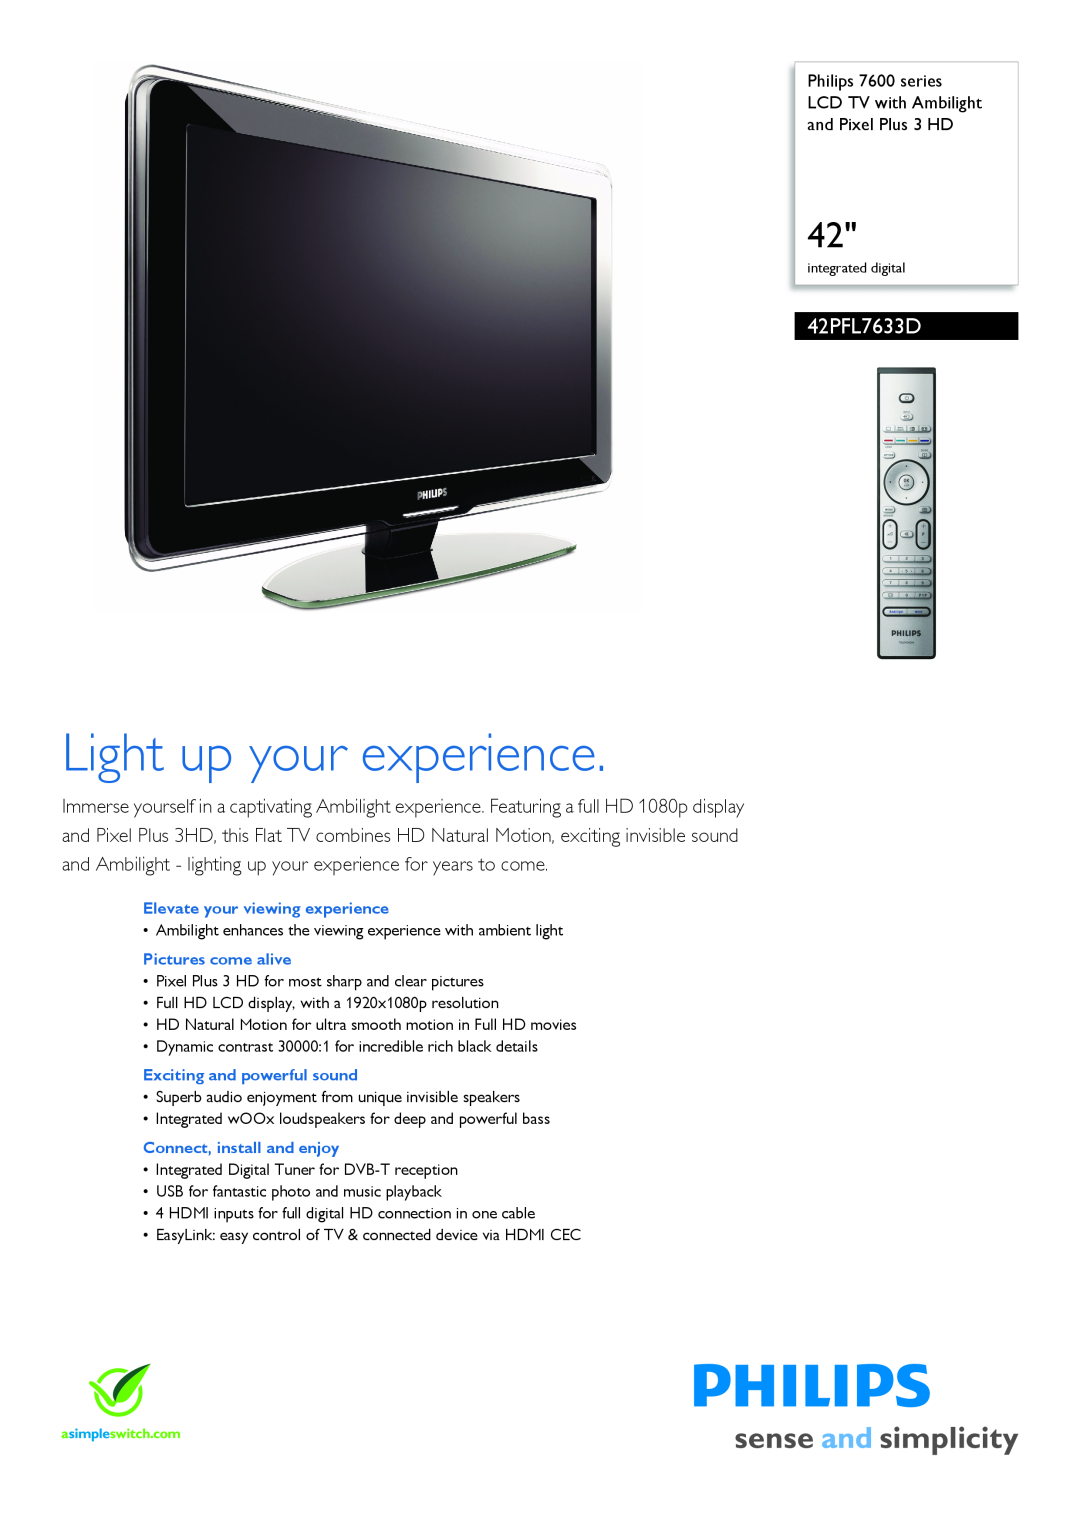 Philips 42PFL7633D/12 manual Philips 7600 series LCD TV with Ambilight and Pixel Plus 3 HD, Pictures come alive 